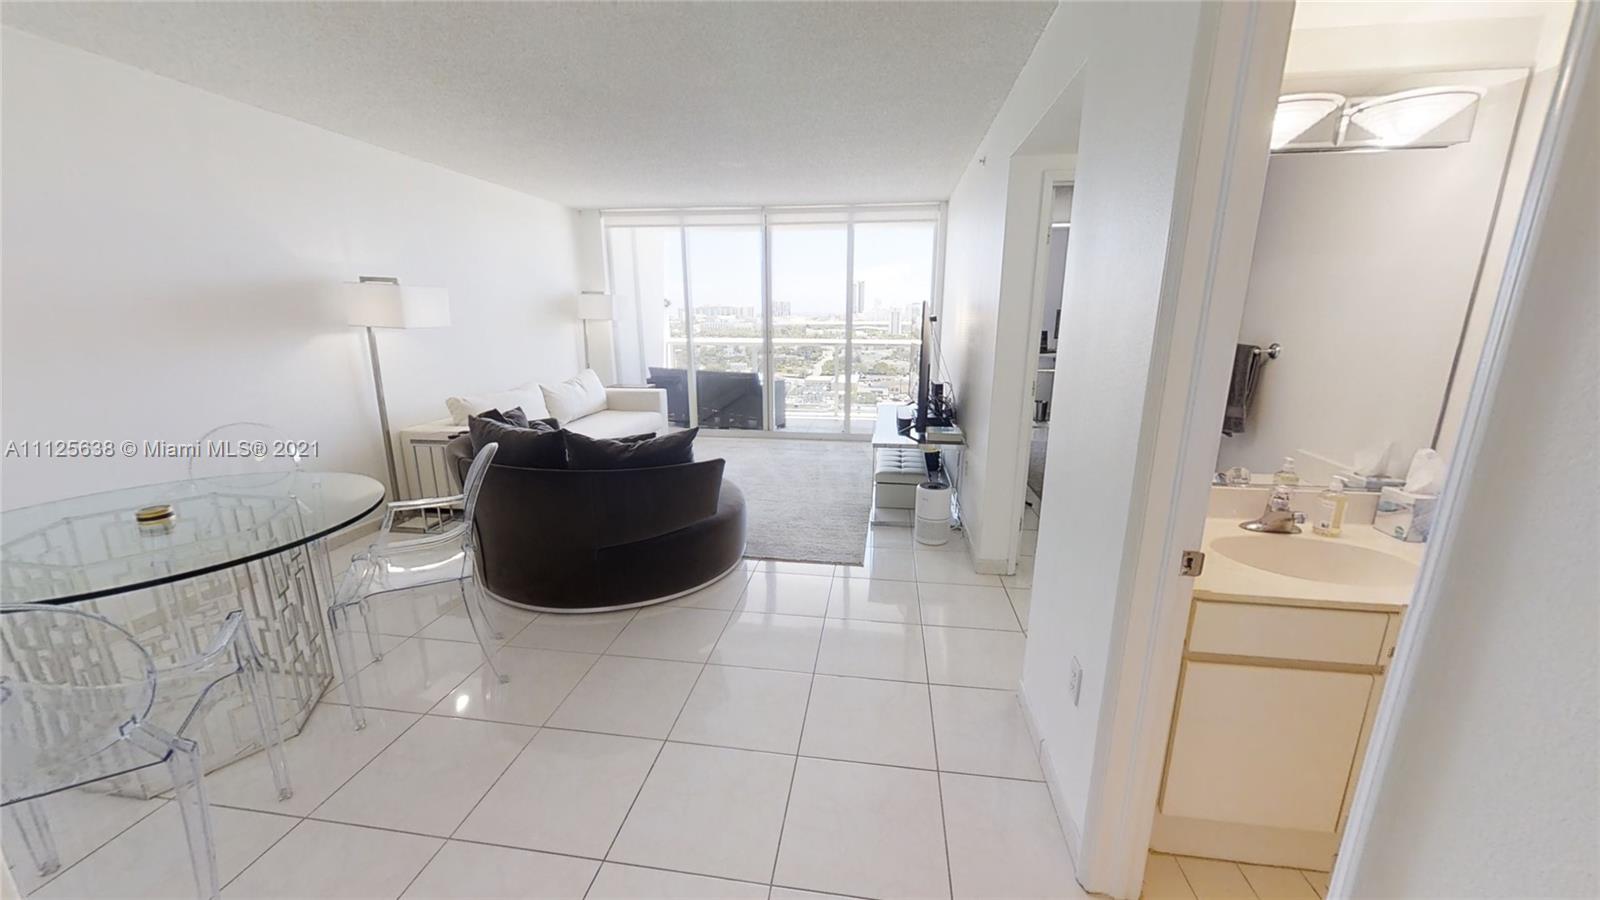 One bedroom + guest 1/2Bath in Sunset Harbour South Tower. Balcony Faces East. Tile flooring throughout. Separate Shower & Bathtub in master. Washer/Dryer closet. Bldg amenities: Bay walk, marina, fitness center, 2 pools, 1 assigned parking P1030 & valet parking.